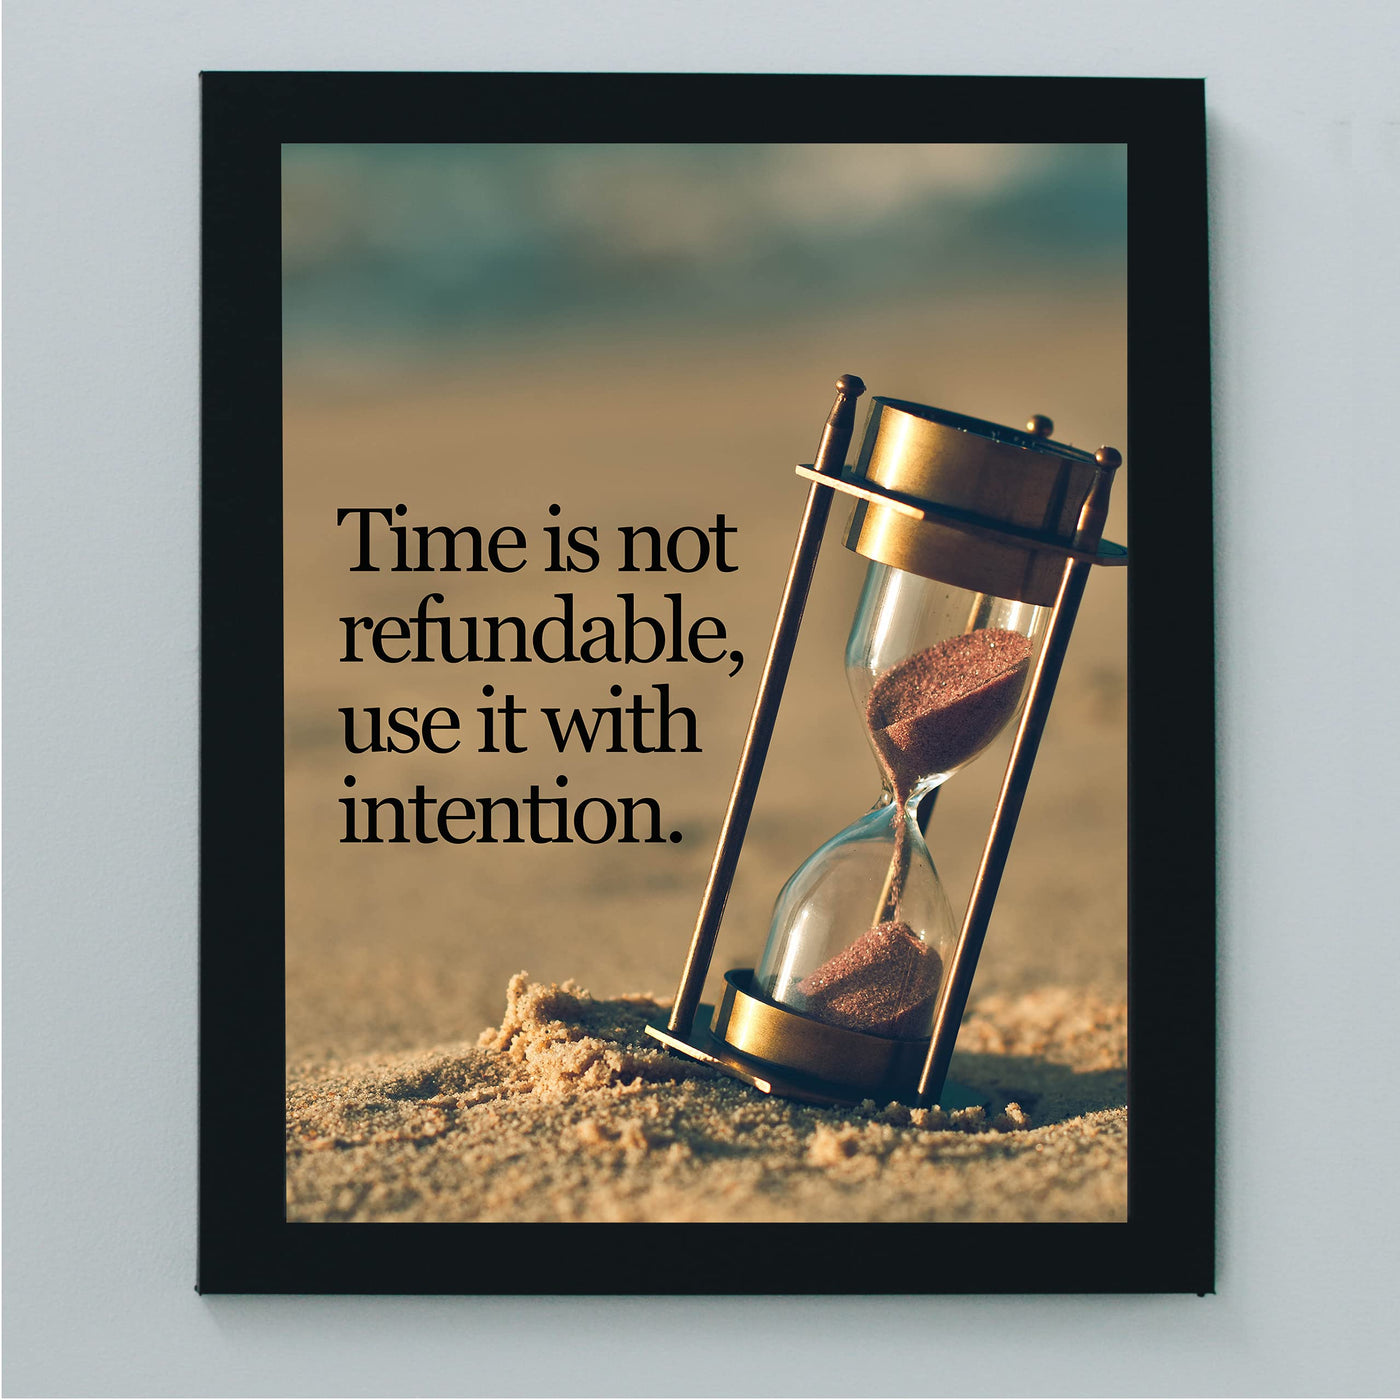 Time Is Not Refundable-Use It With Intention Inspirational Wall Quotes-8x10" Motivational Art Print-Ready to Frame. Vintage Typographic Home-Office-Desk-School Decor. Great Sign for Inspiration!